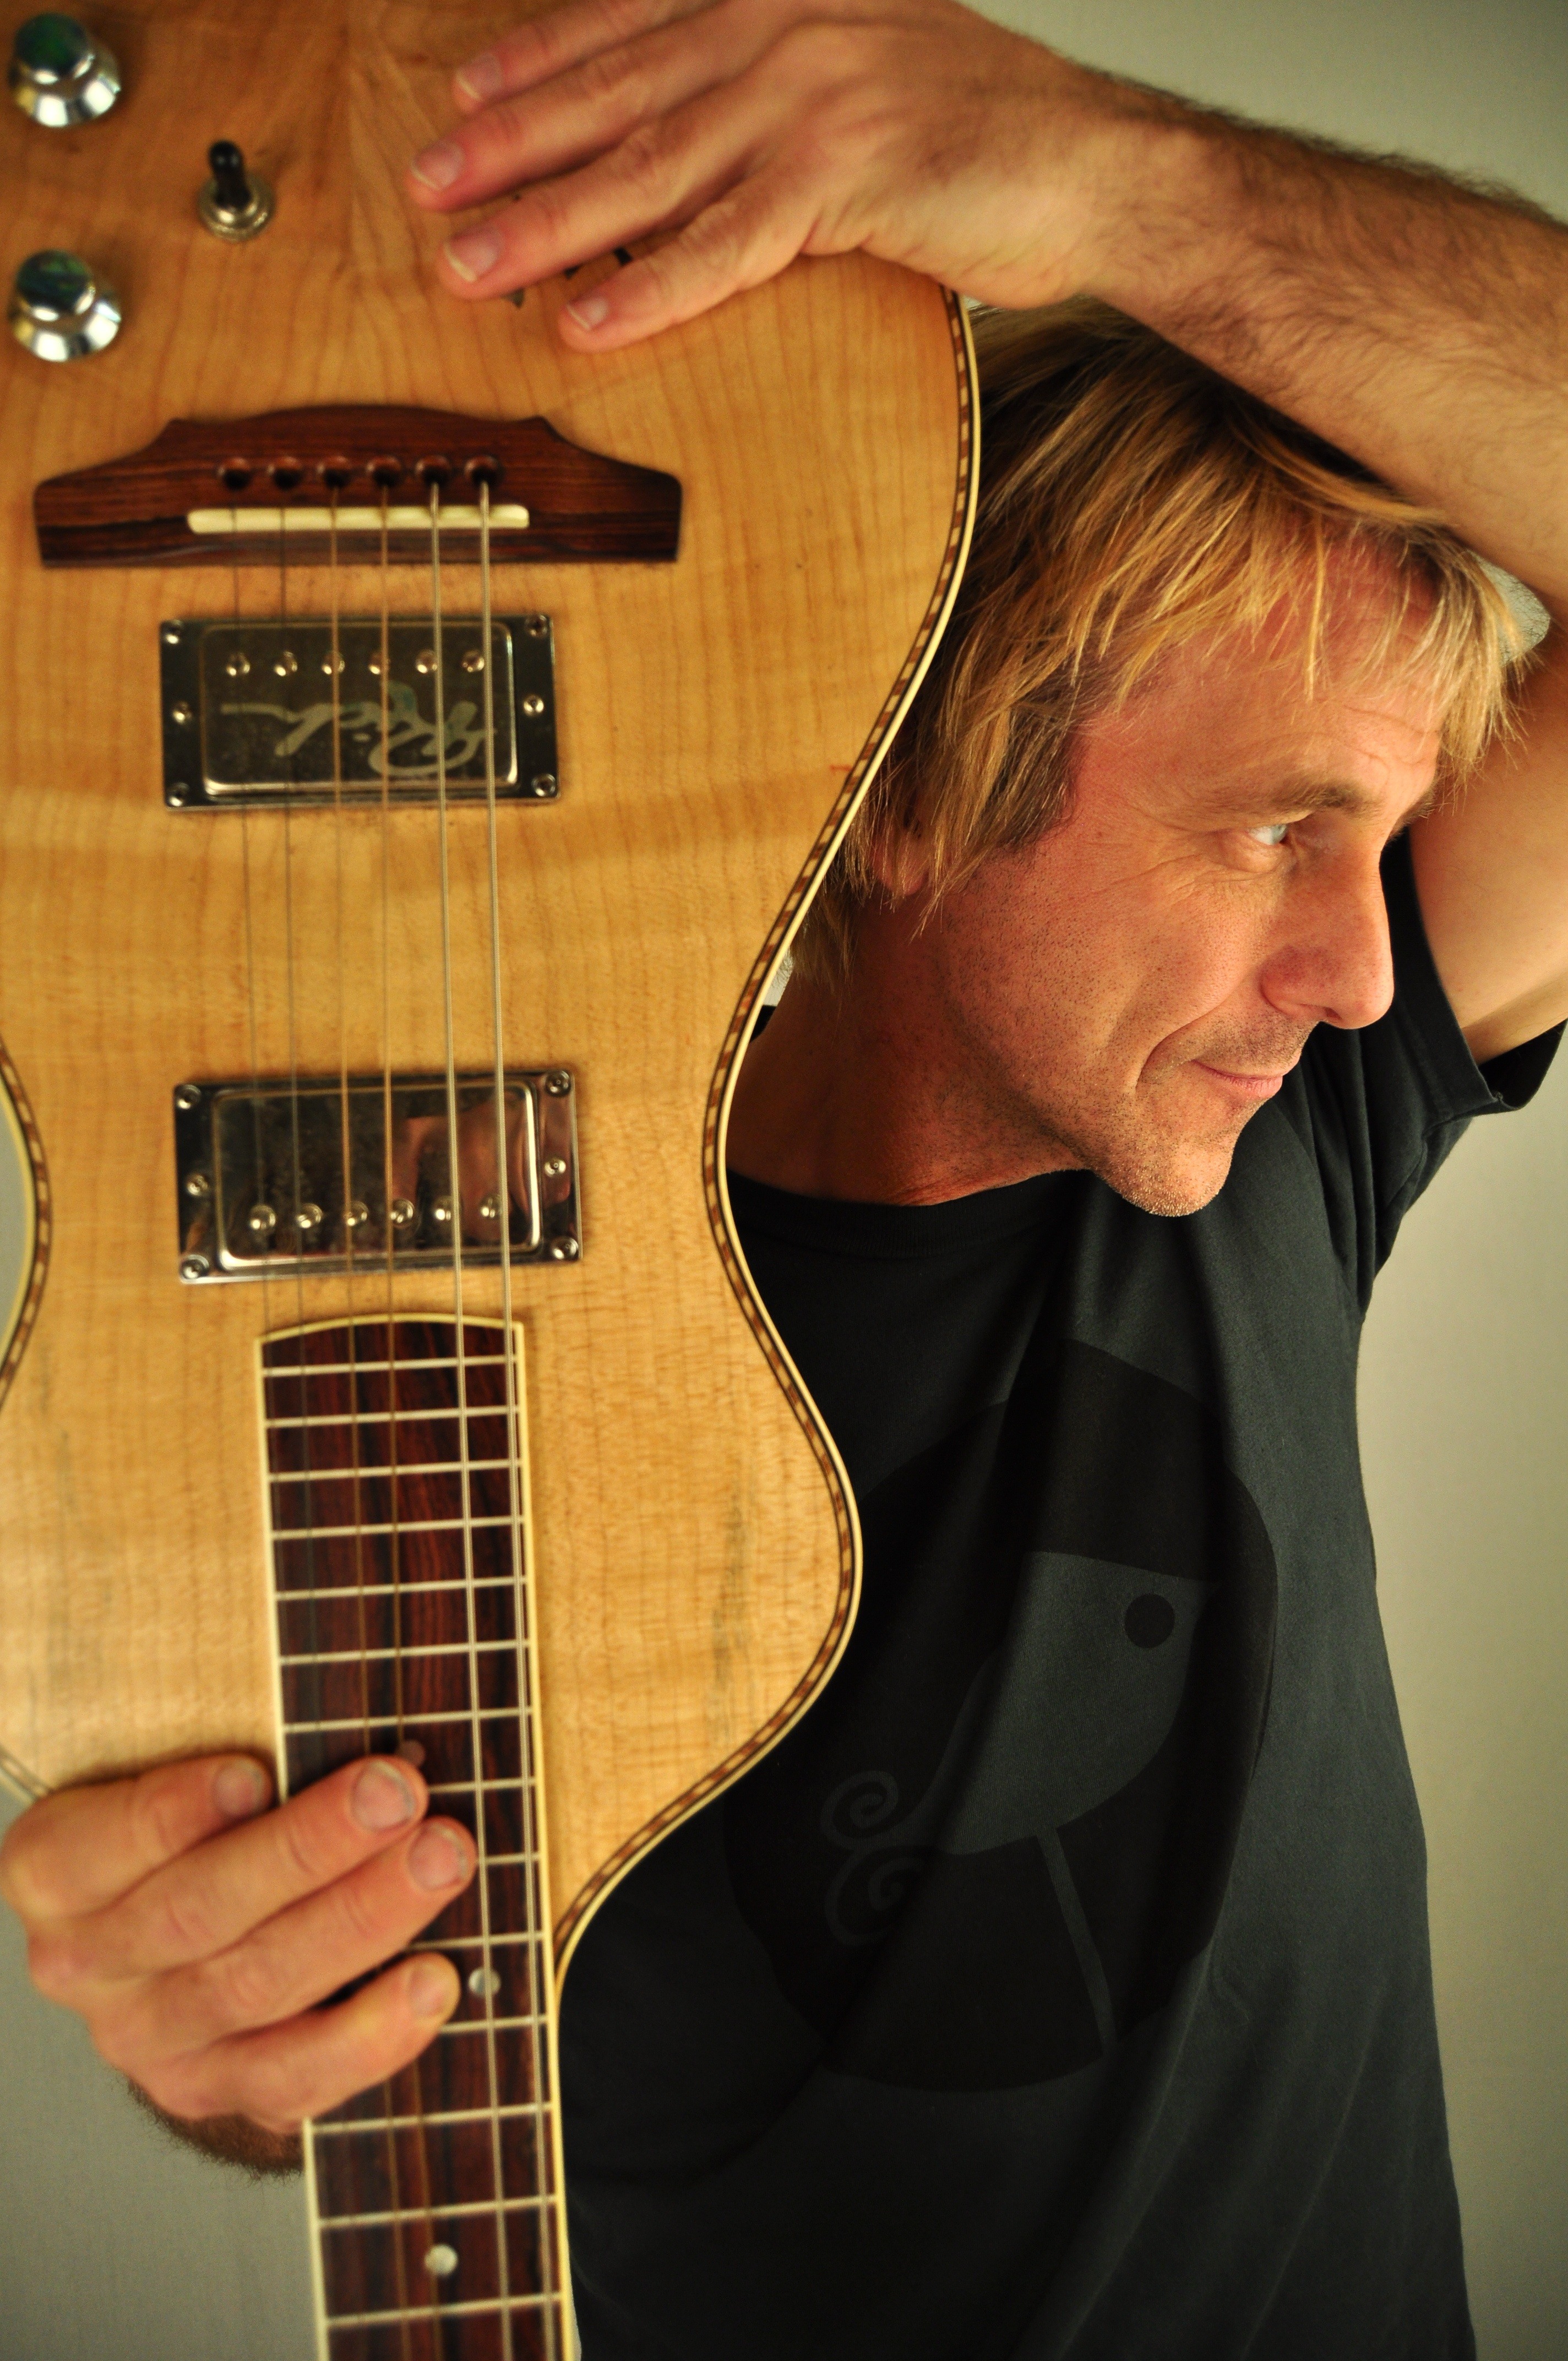 FUSION - Musician Shane Philip brings his mesmerizing styles of music to The Vat on Feb. 15.